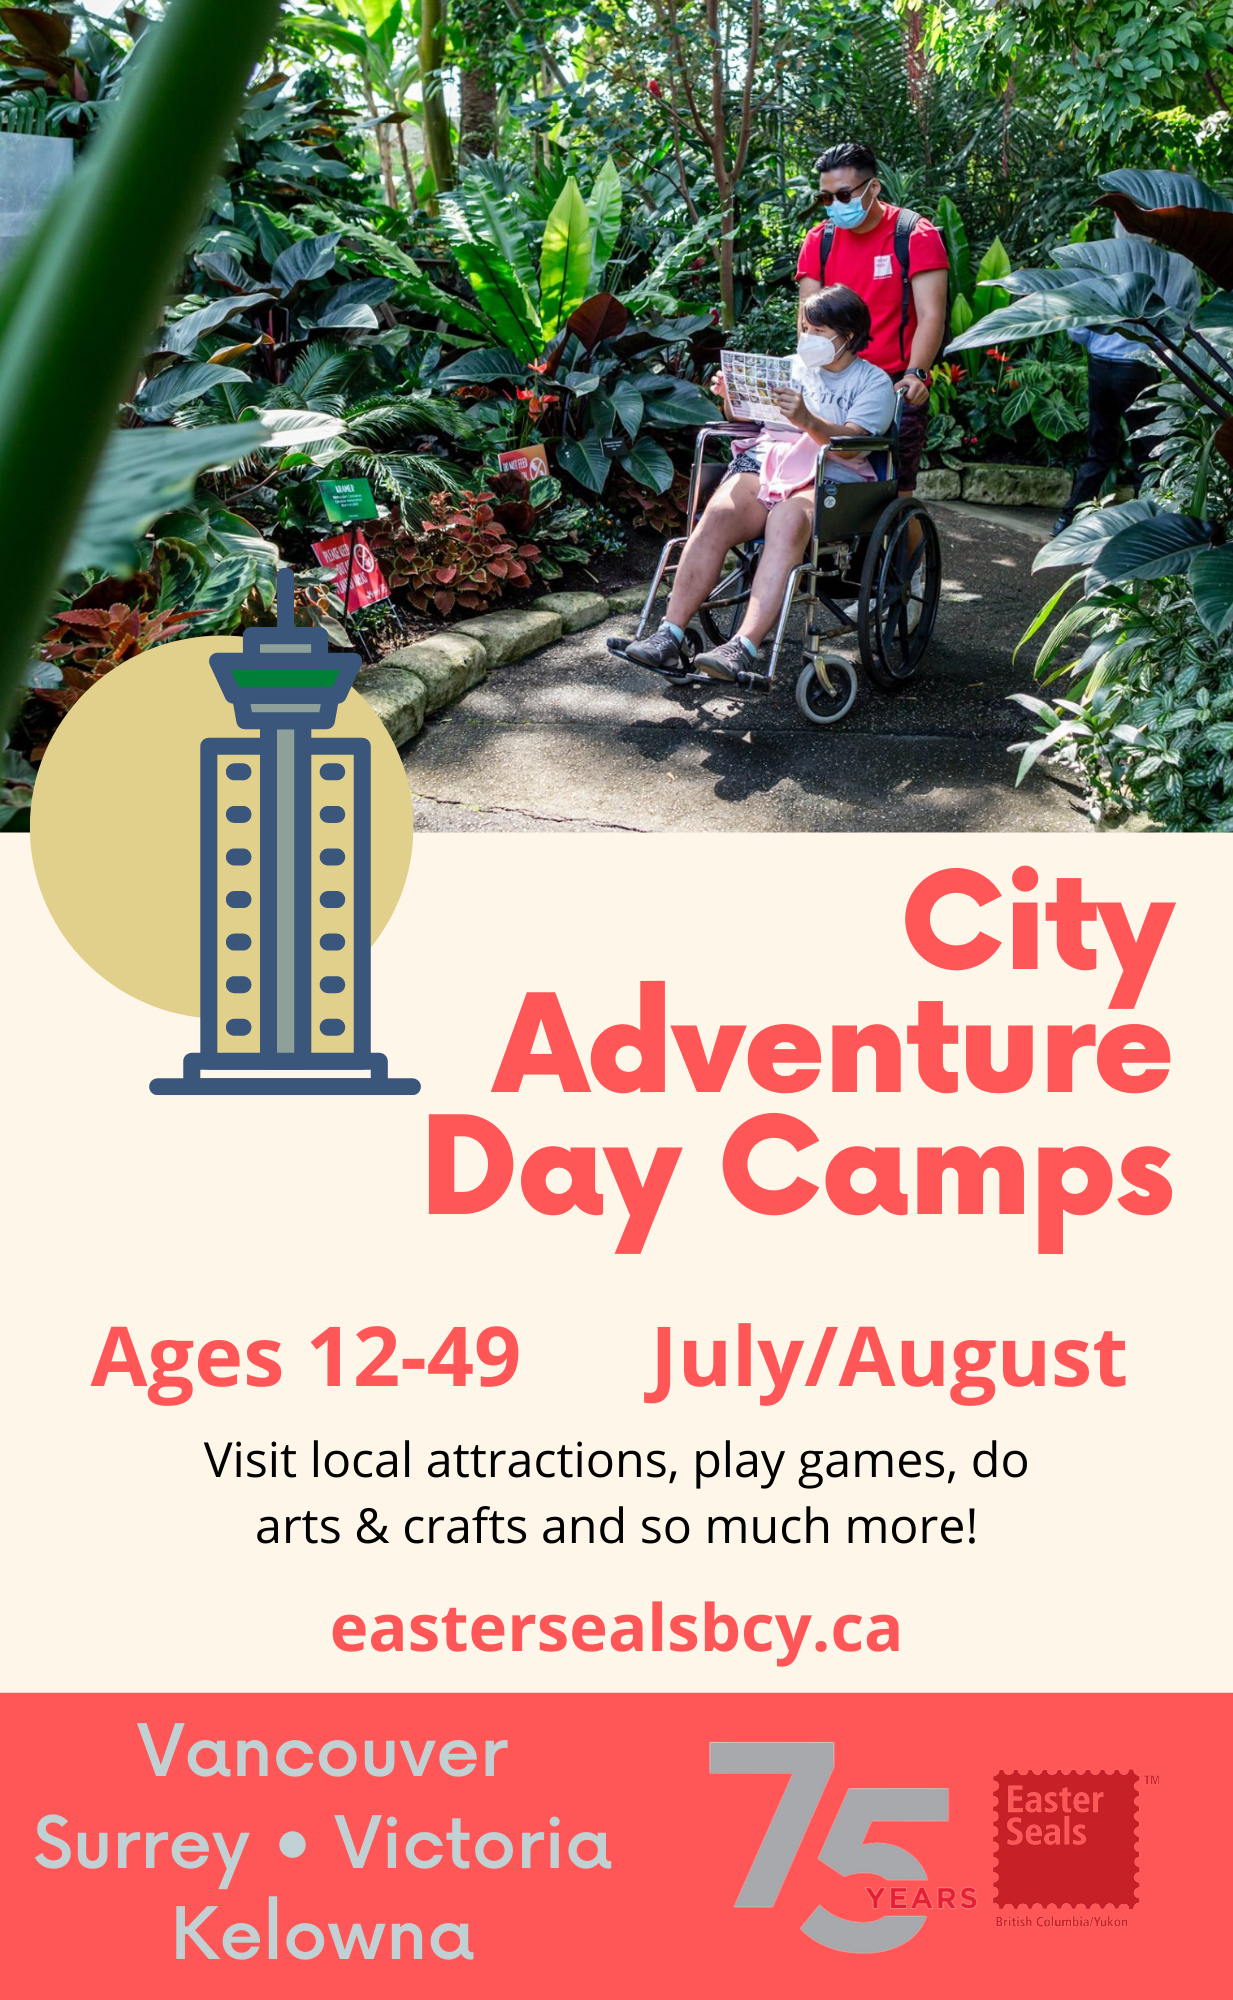 City Adventure Day Camps